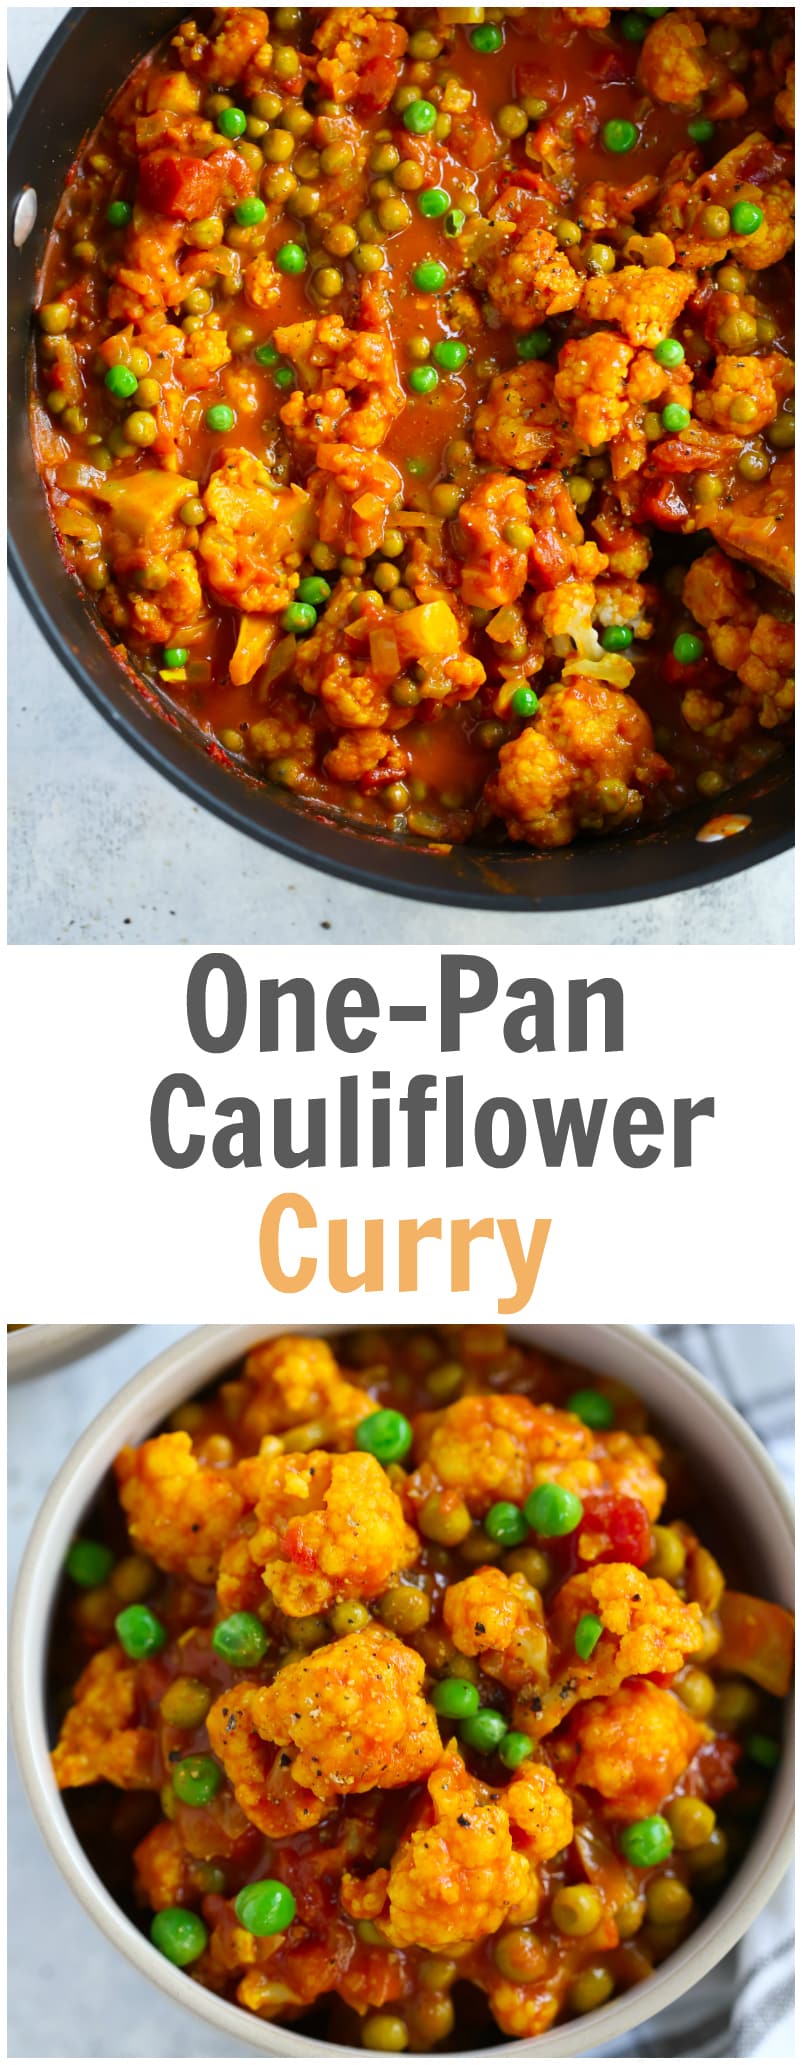 Easy One-Pan Cauliflower Curry Recipe is ready in 20 minutes. It’s made with cauliflower, green peas, diced tomatoes, curry and coconut milk. Also this recipe is gluten-free, vegan and if you don’t add green peas it’s low-carb too.